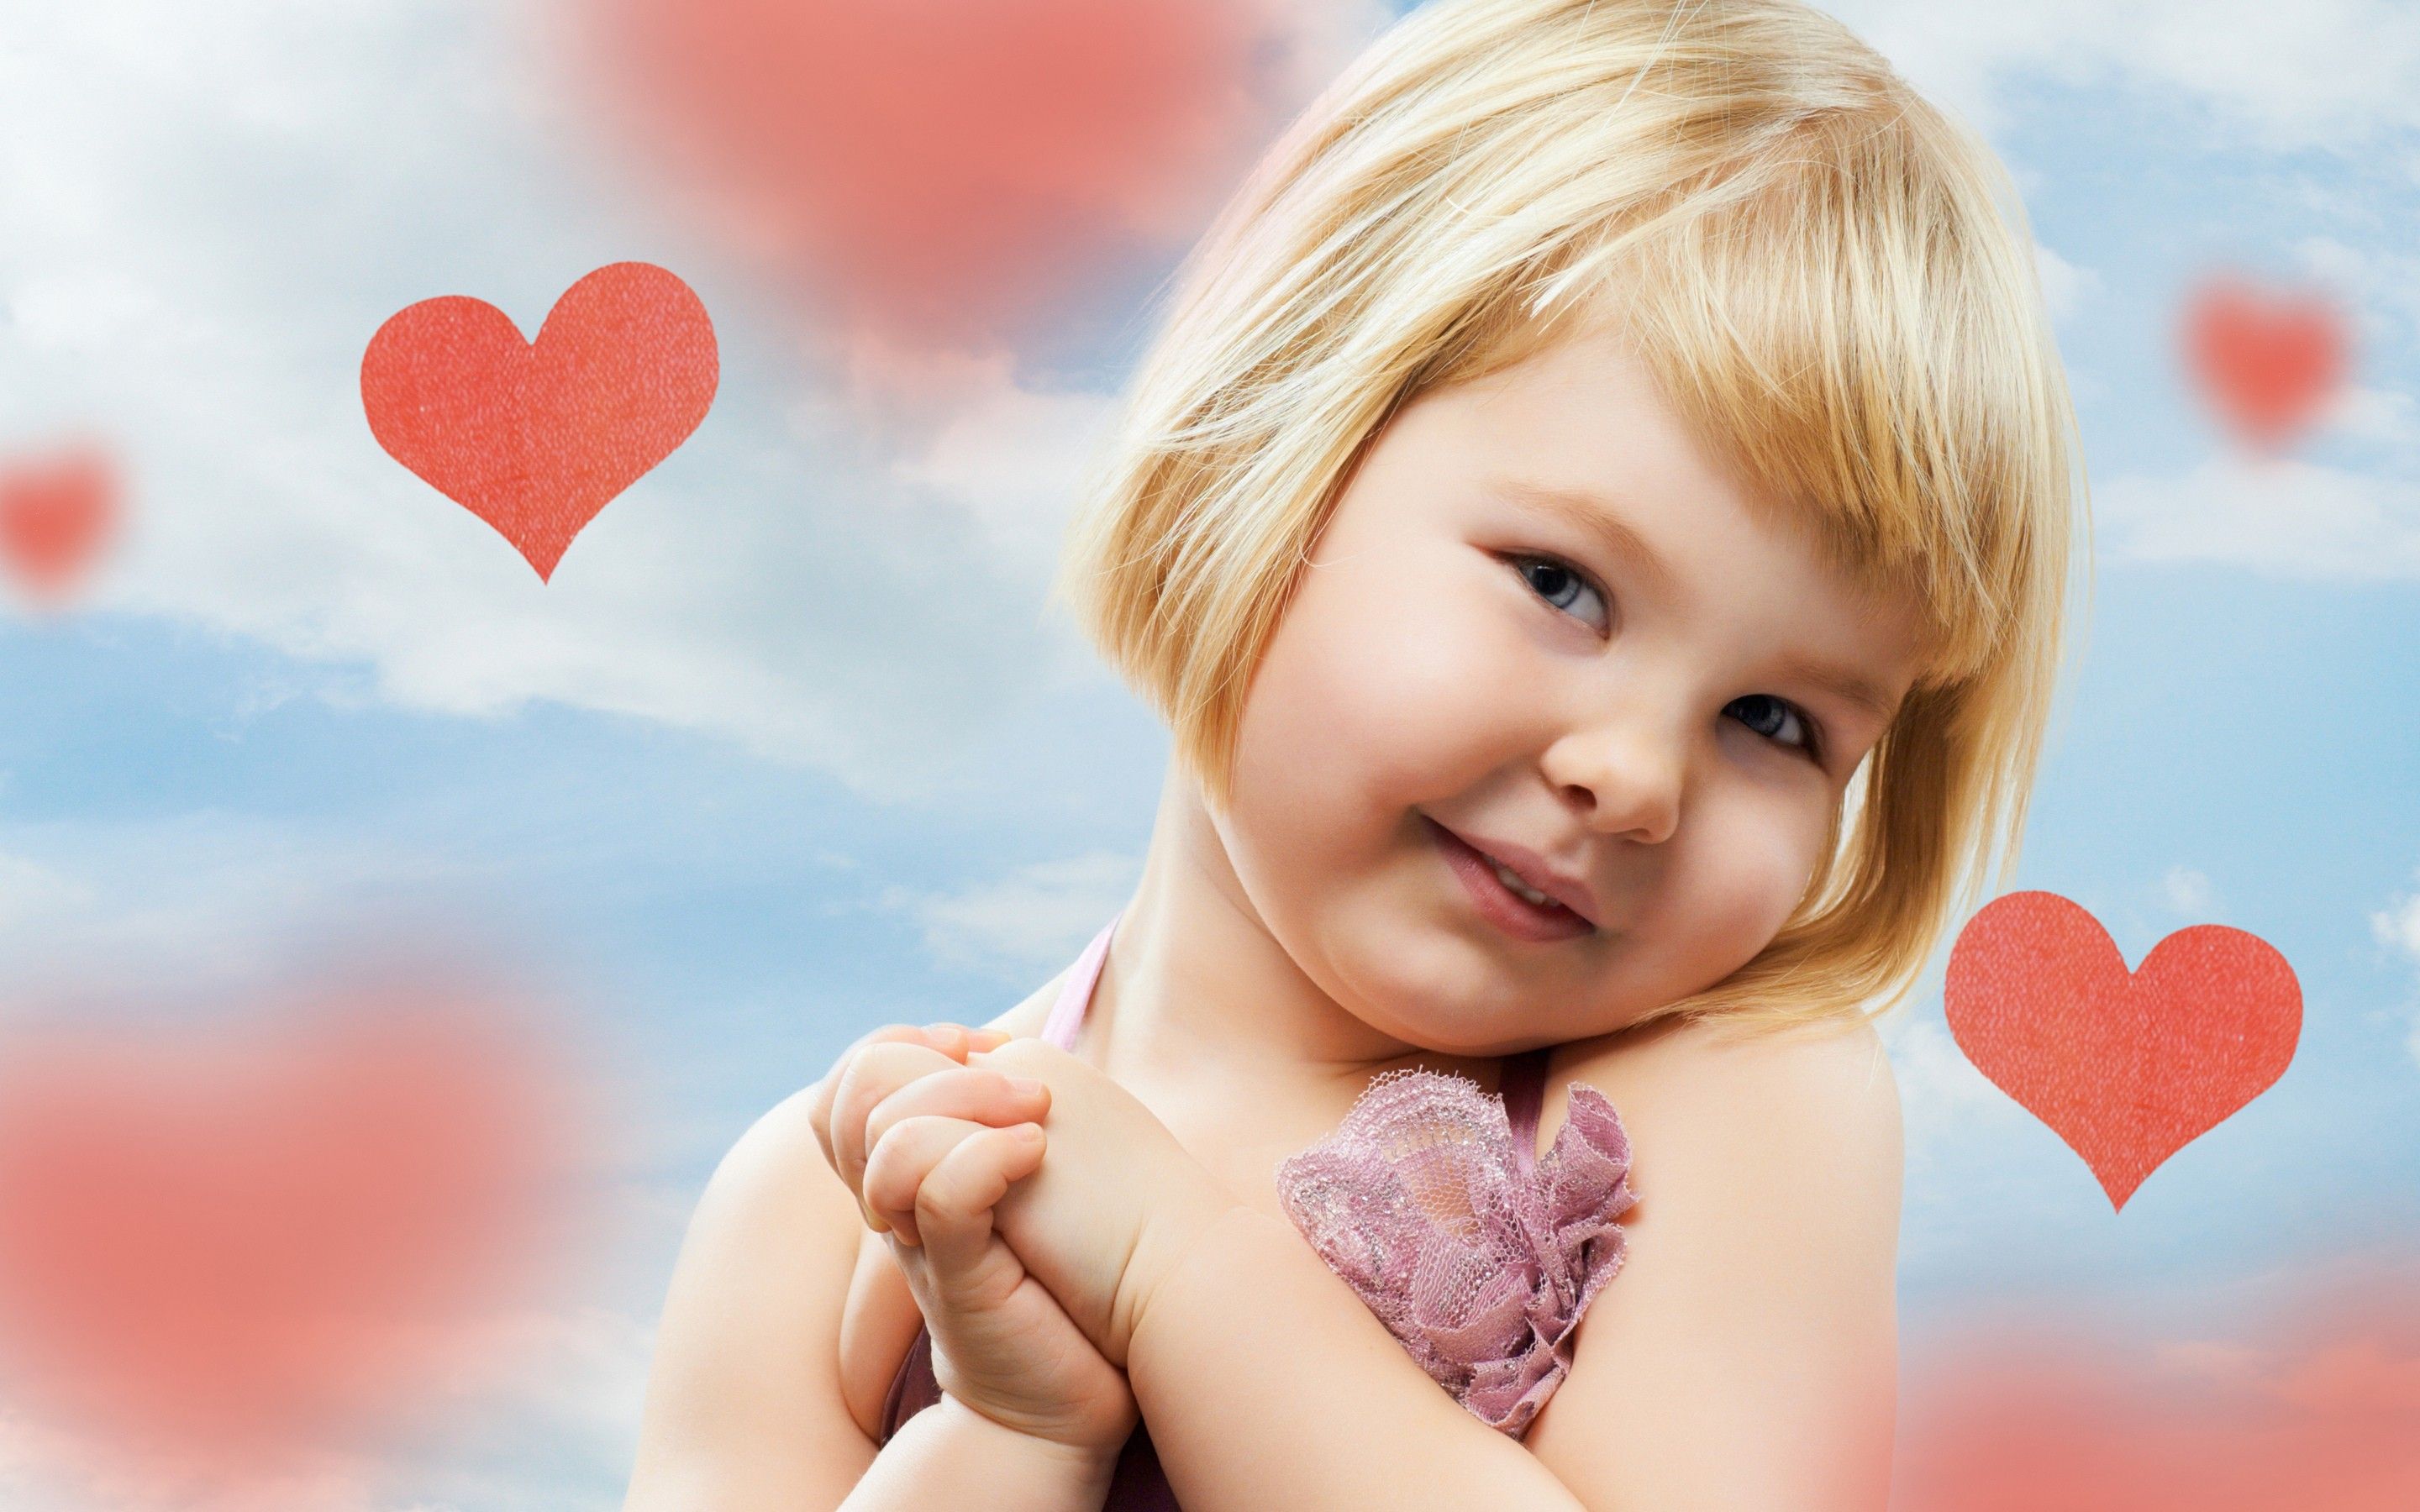 beautiful baby girl hd posters | Free wallpapers